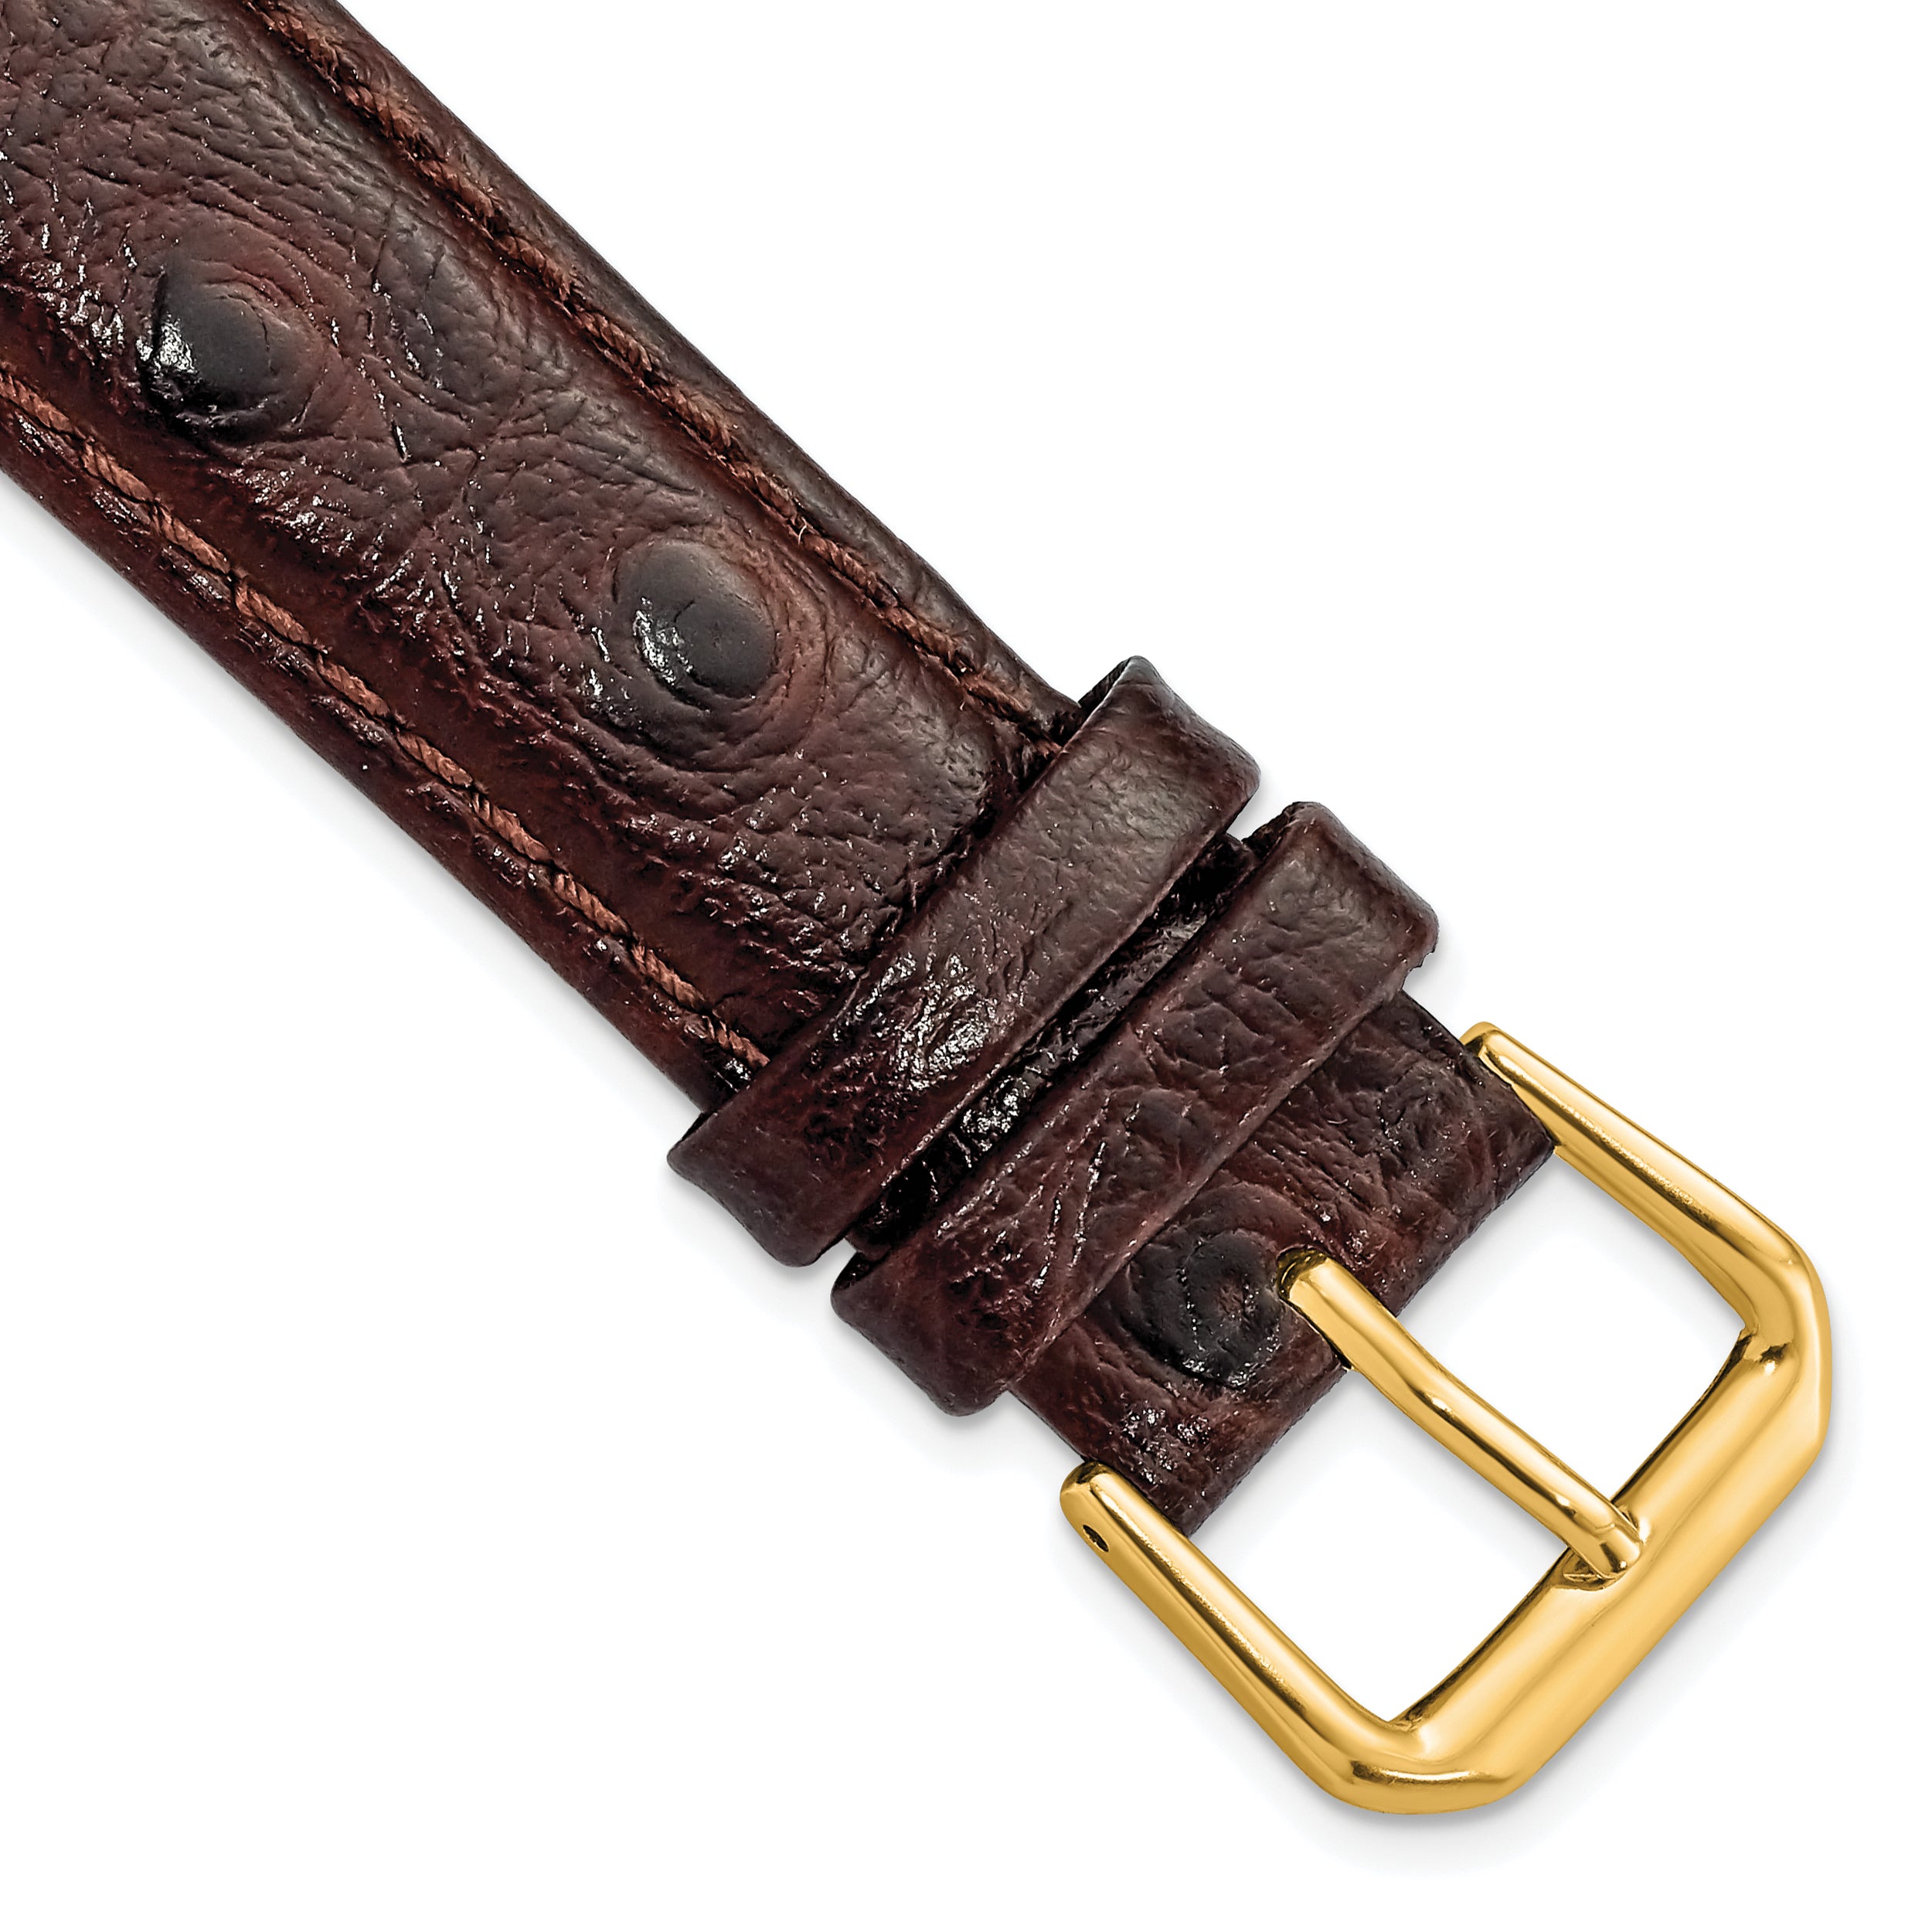 DeBeer 18mm Brown Ostrich Grain Leather with Gold-tone Buckle 7.5 inch Watch Band